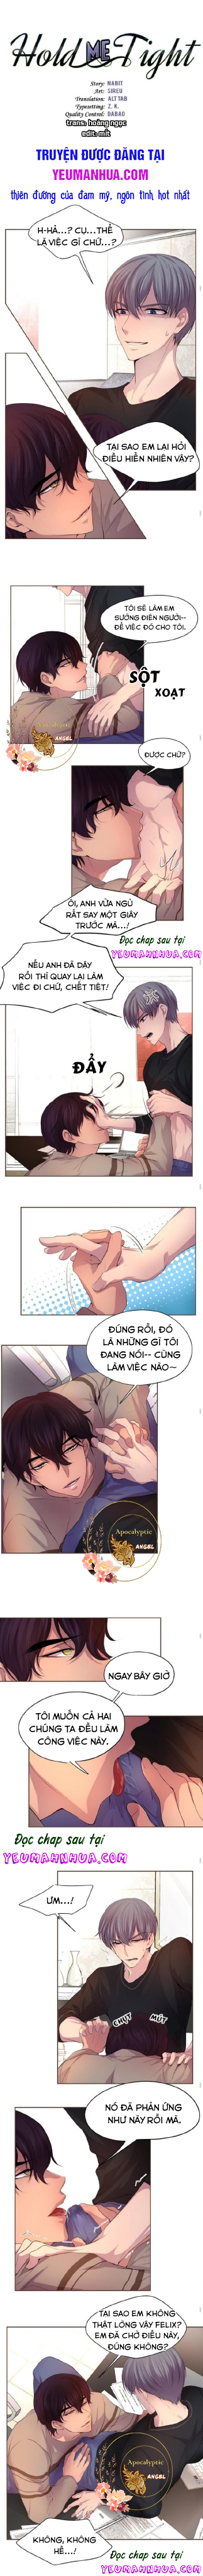 Giữa Em Thật Chặt (Hold Me Tight) Chapter 29 - Trang 4